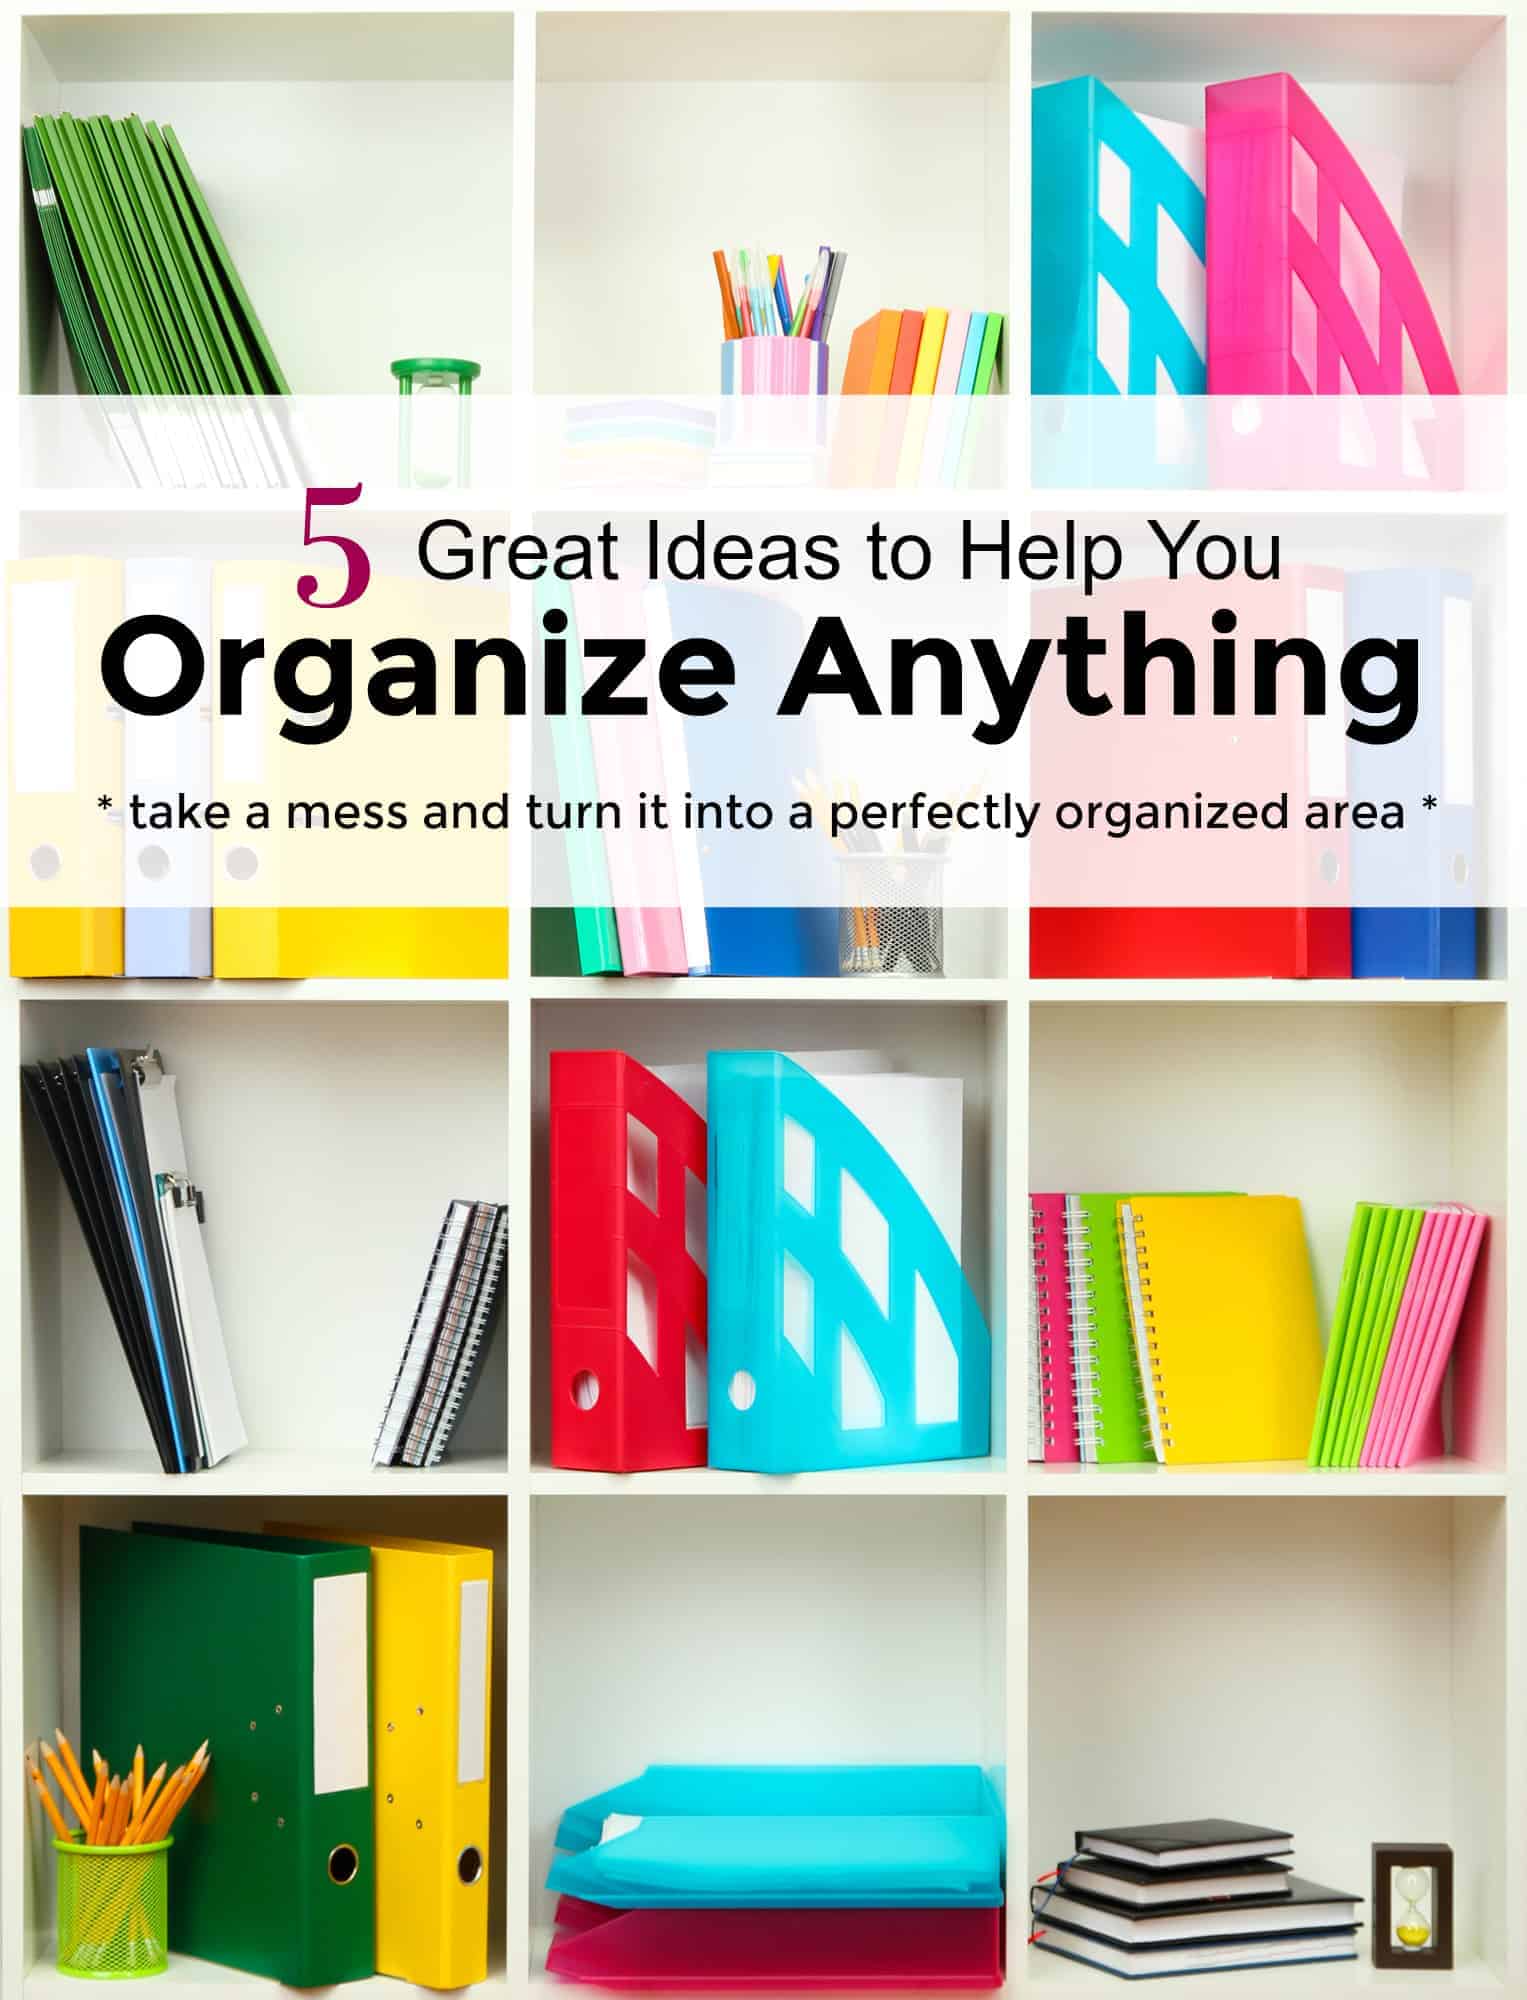 5 Great Ideas to Help You Organize Anything